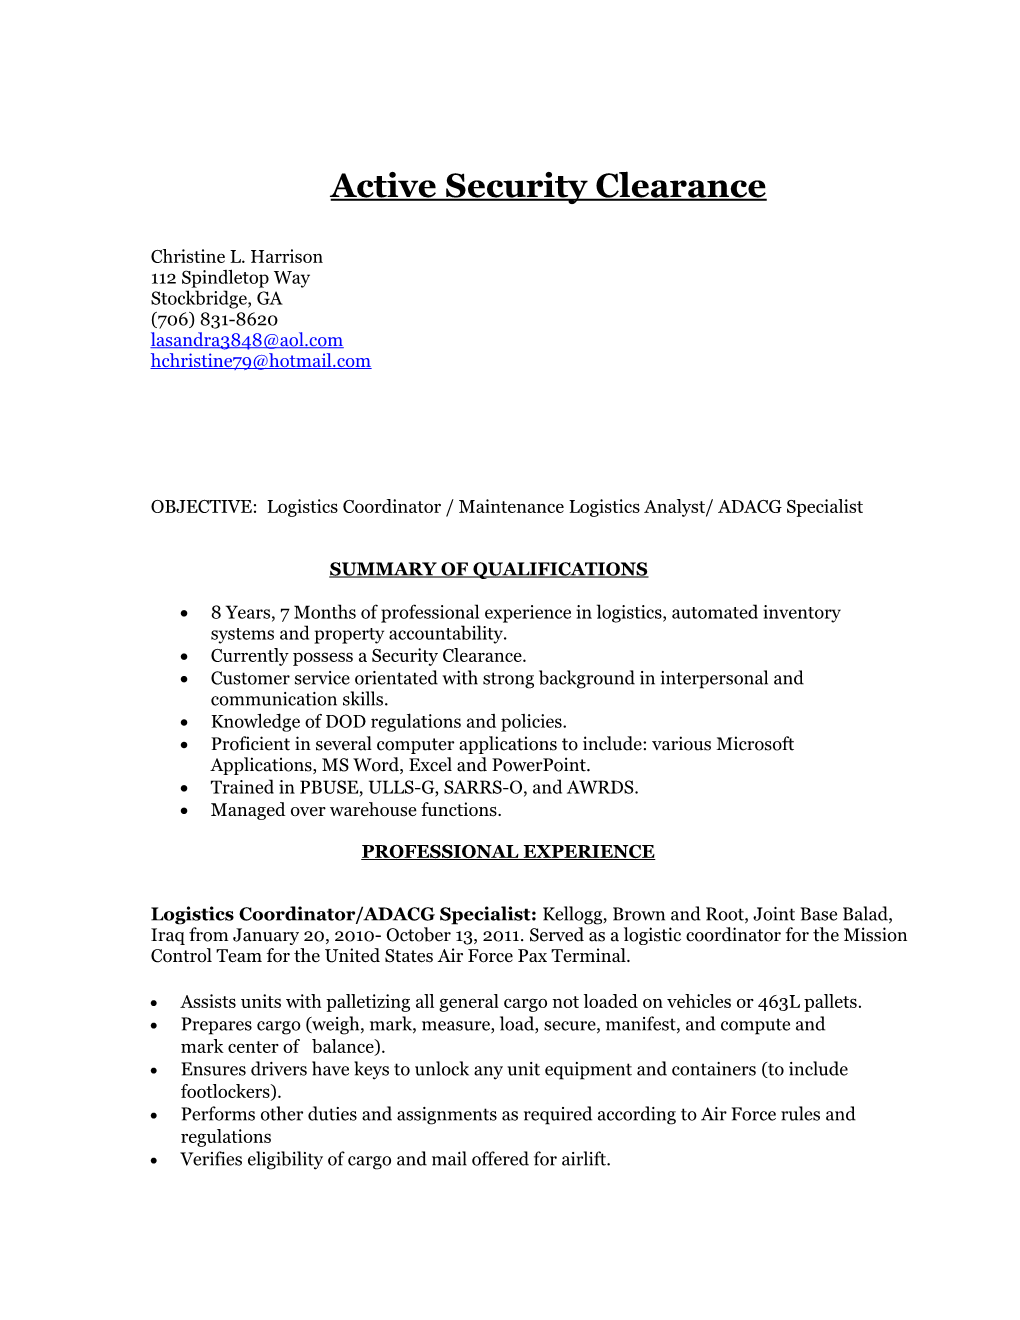 Active Security Clearance